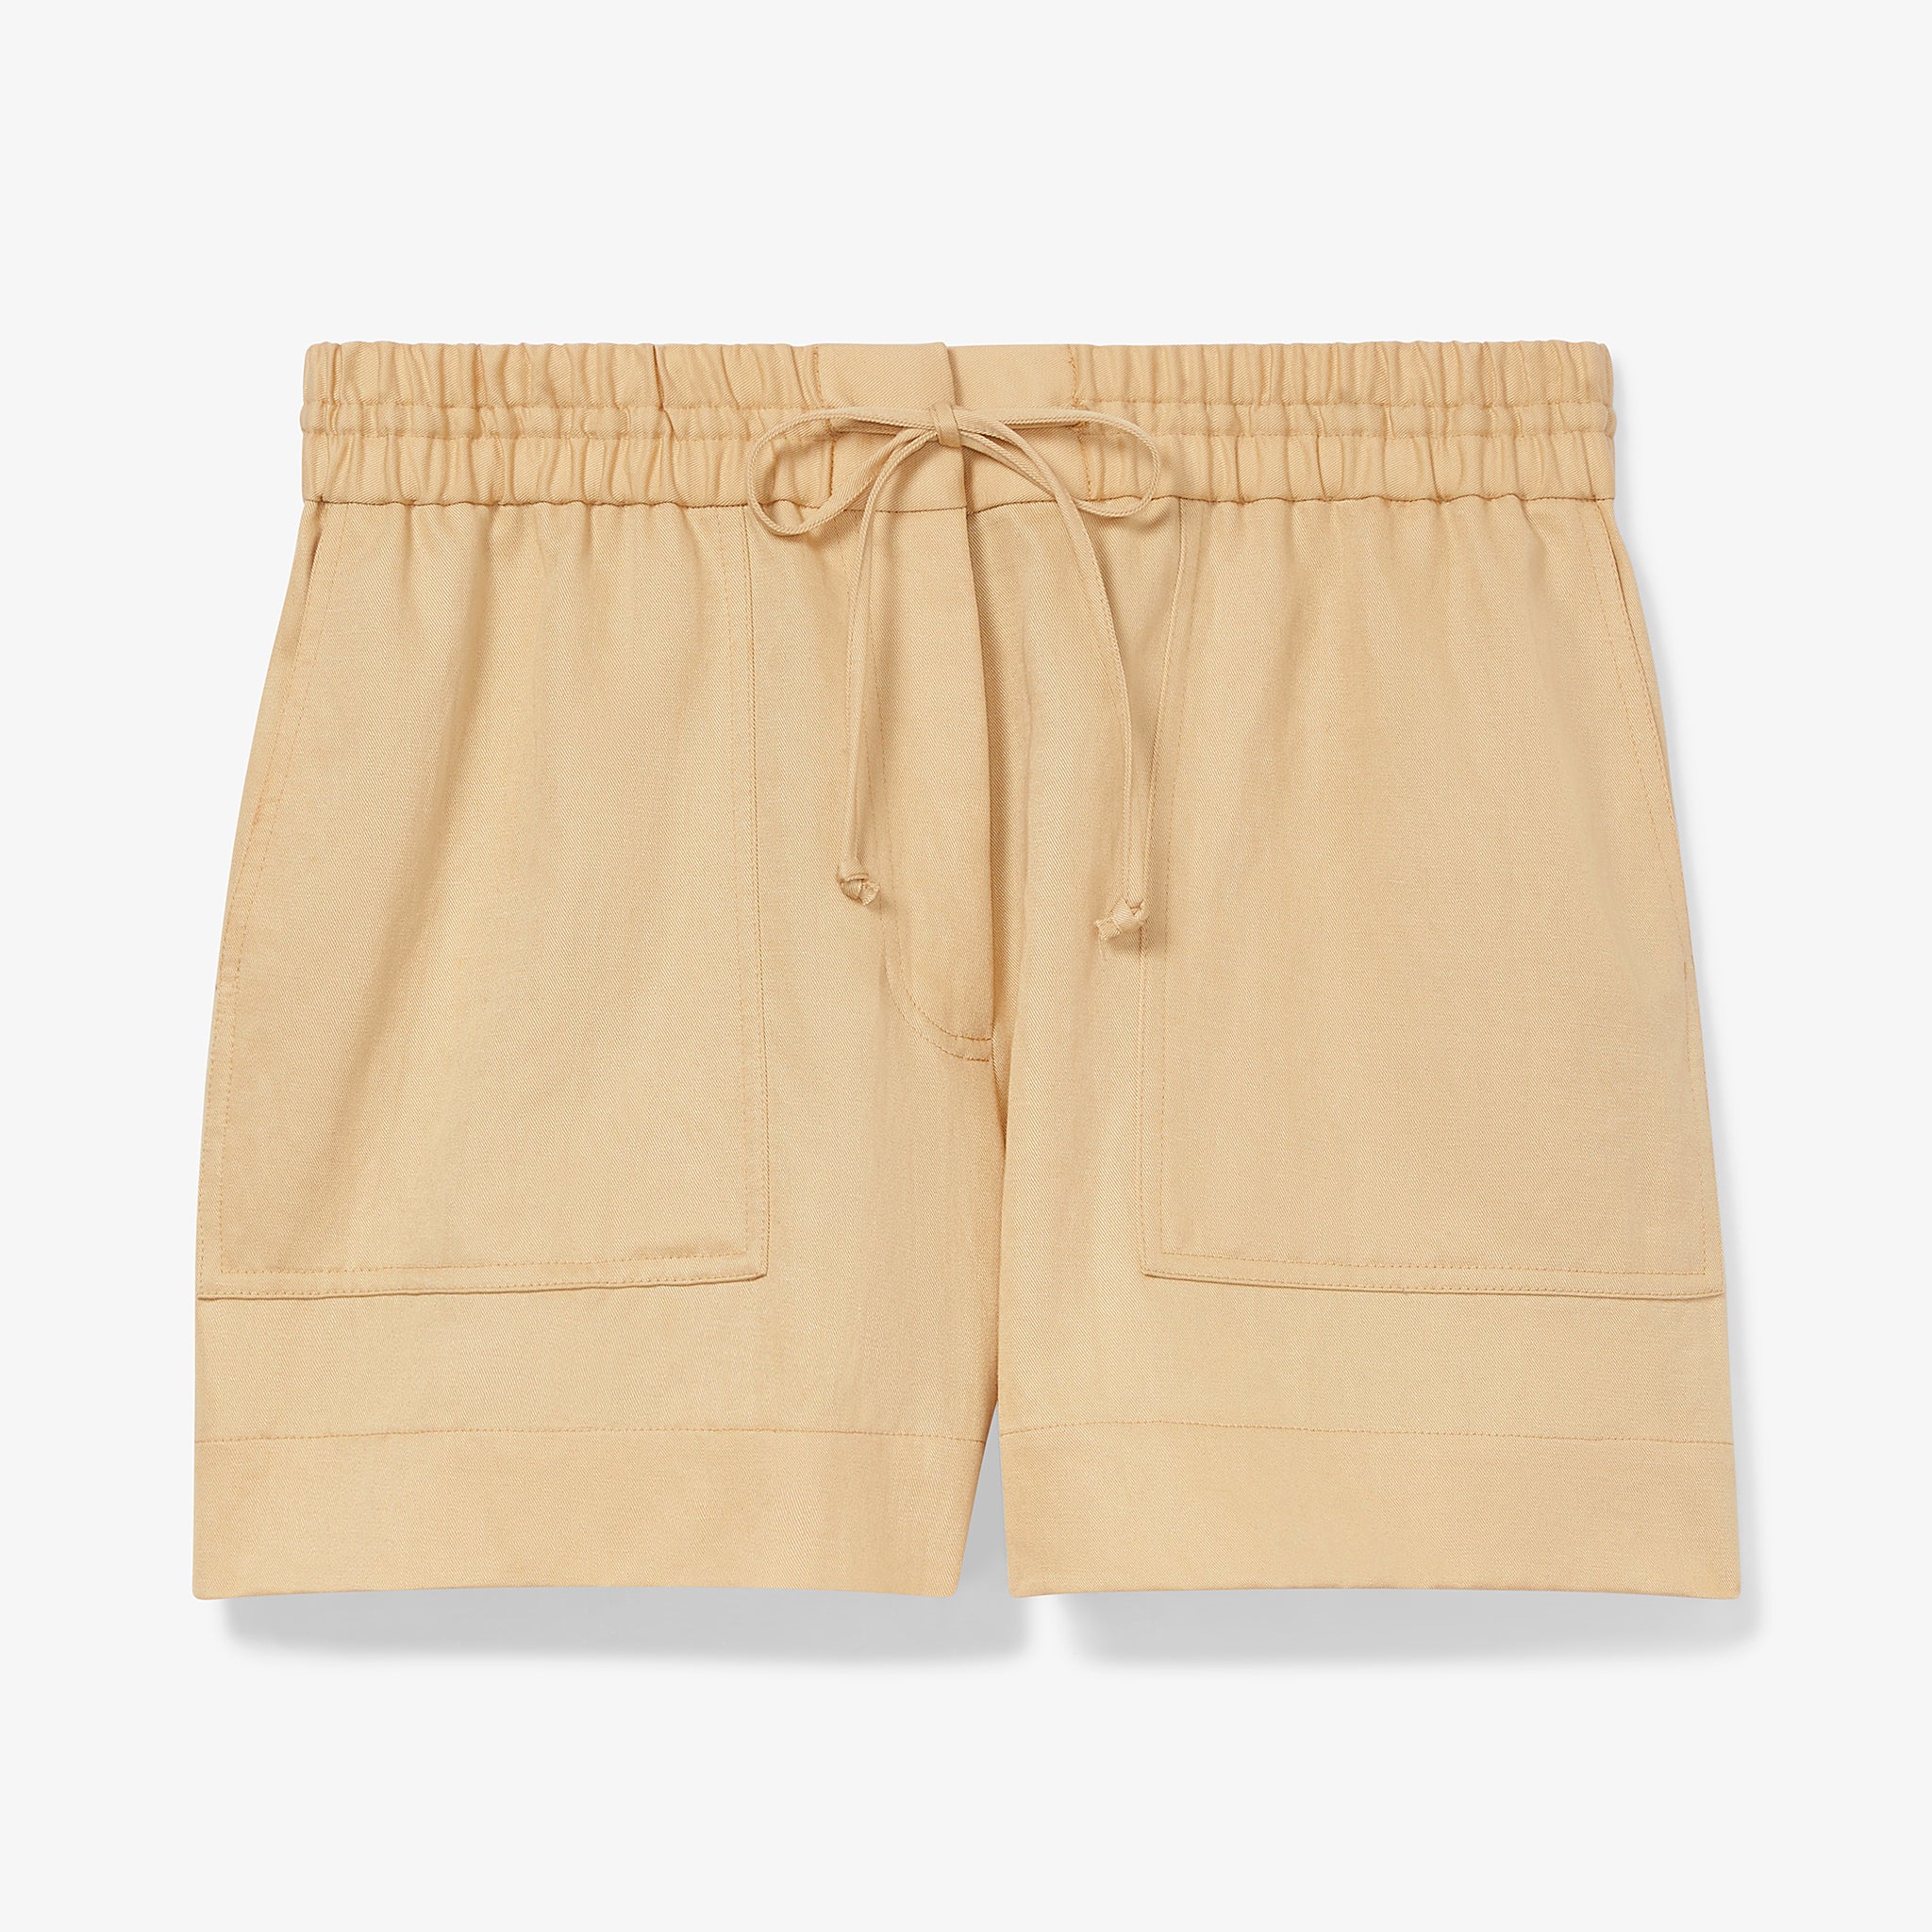 Packshot image of the Adina Short - Everyday Twill in Butter